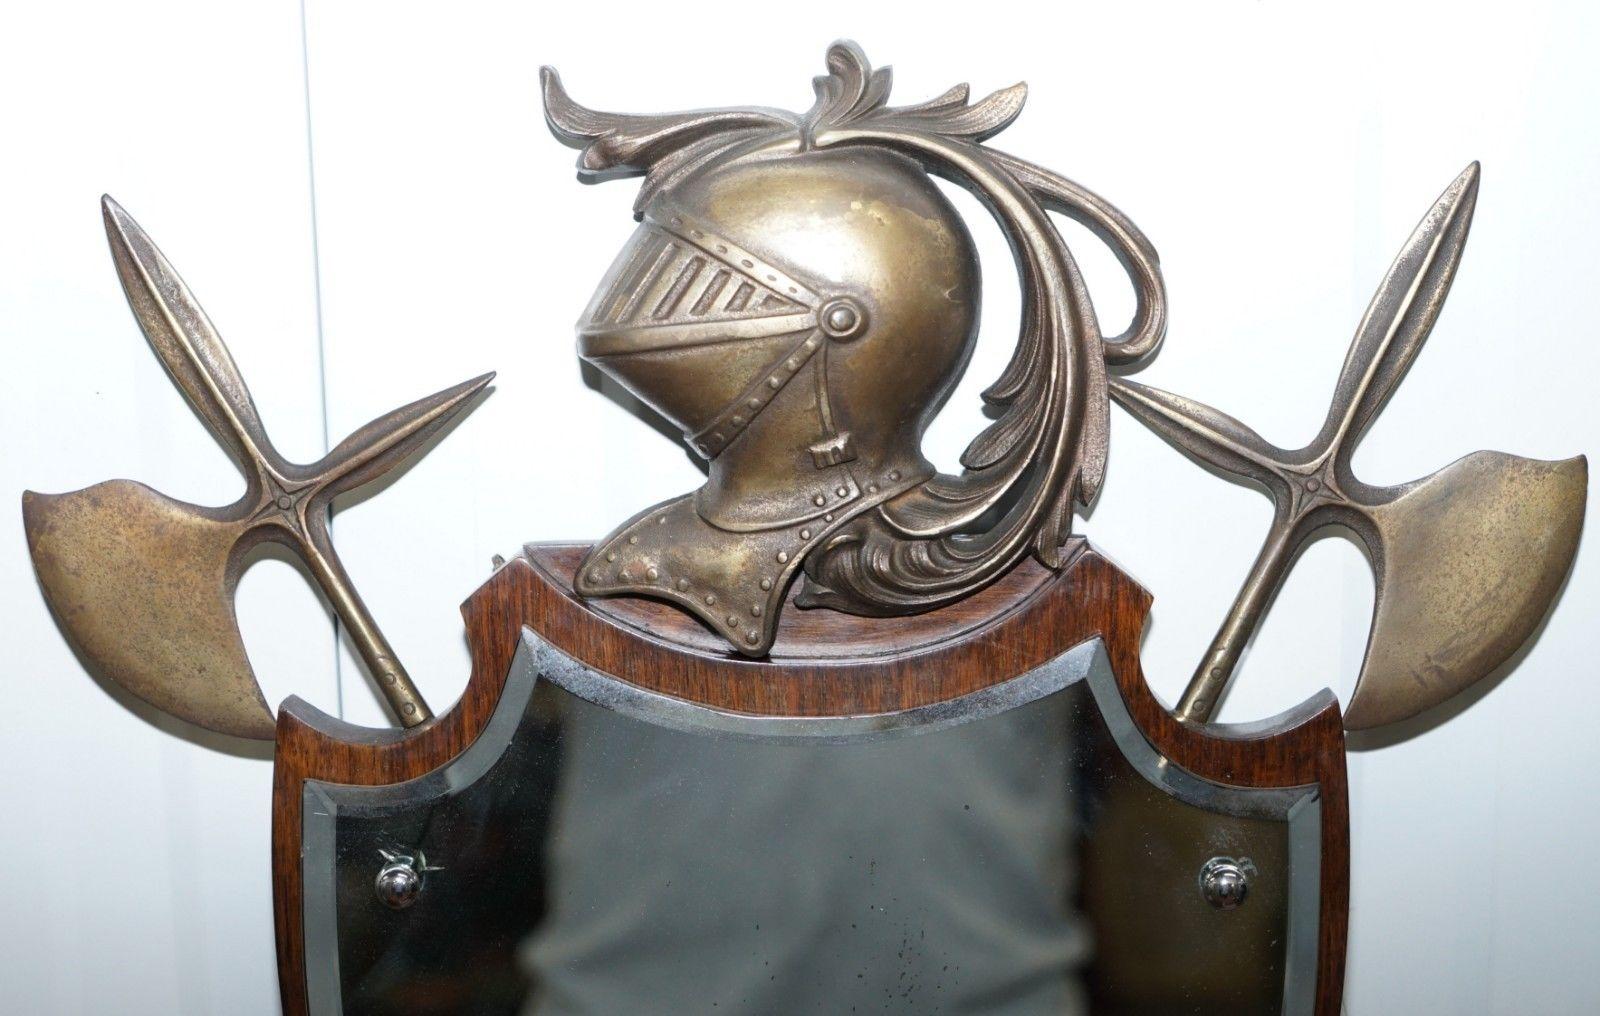 We are delighted to offer for sale this stunning antique wall mirror with armour and axe detailing in bronze mounts

A very good looking and decorative piece, the glass plate mirror is original, the bronze helmet has the foundry stamp and serial